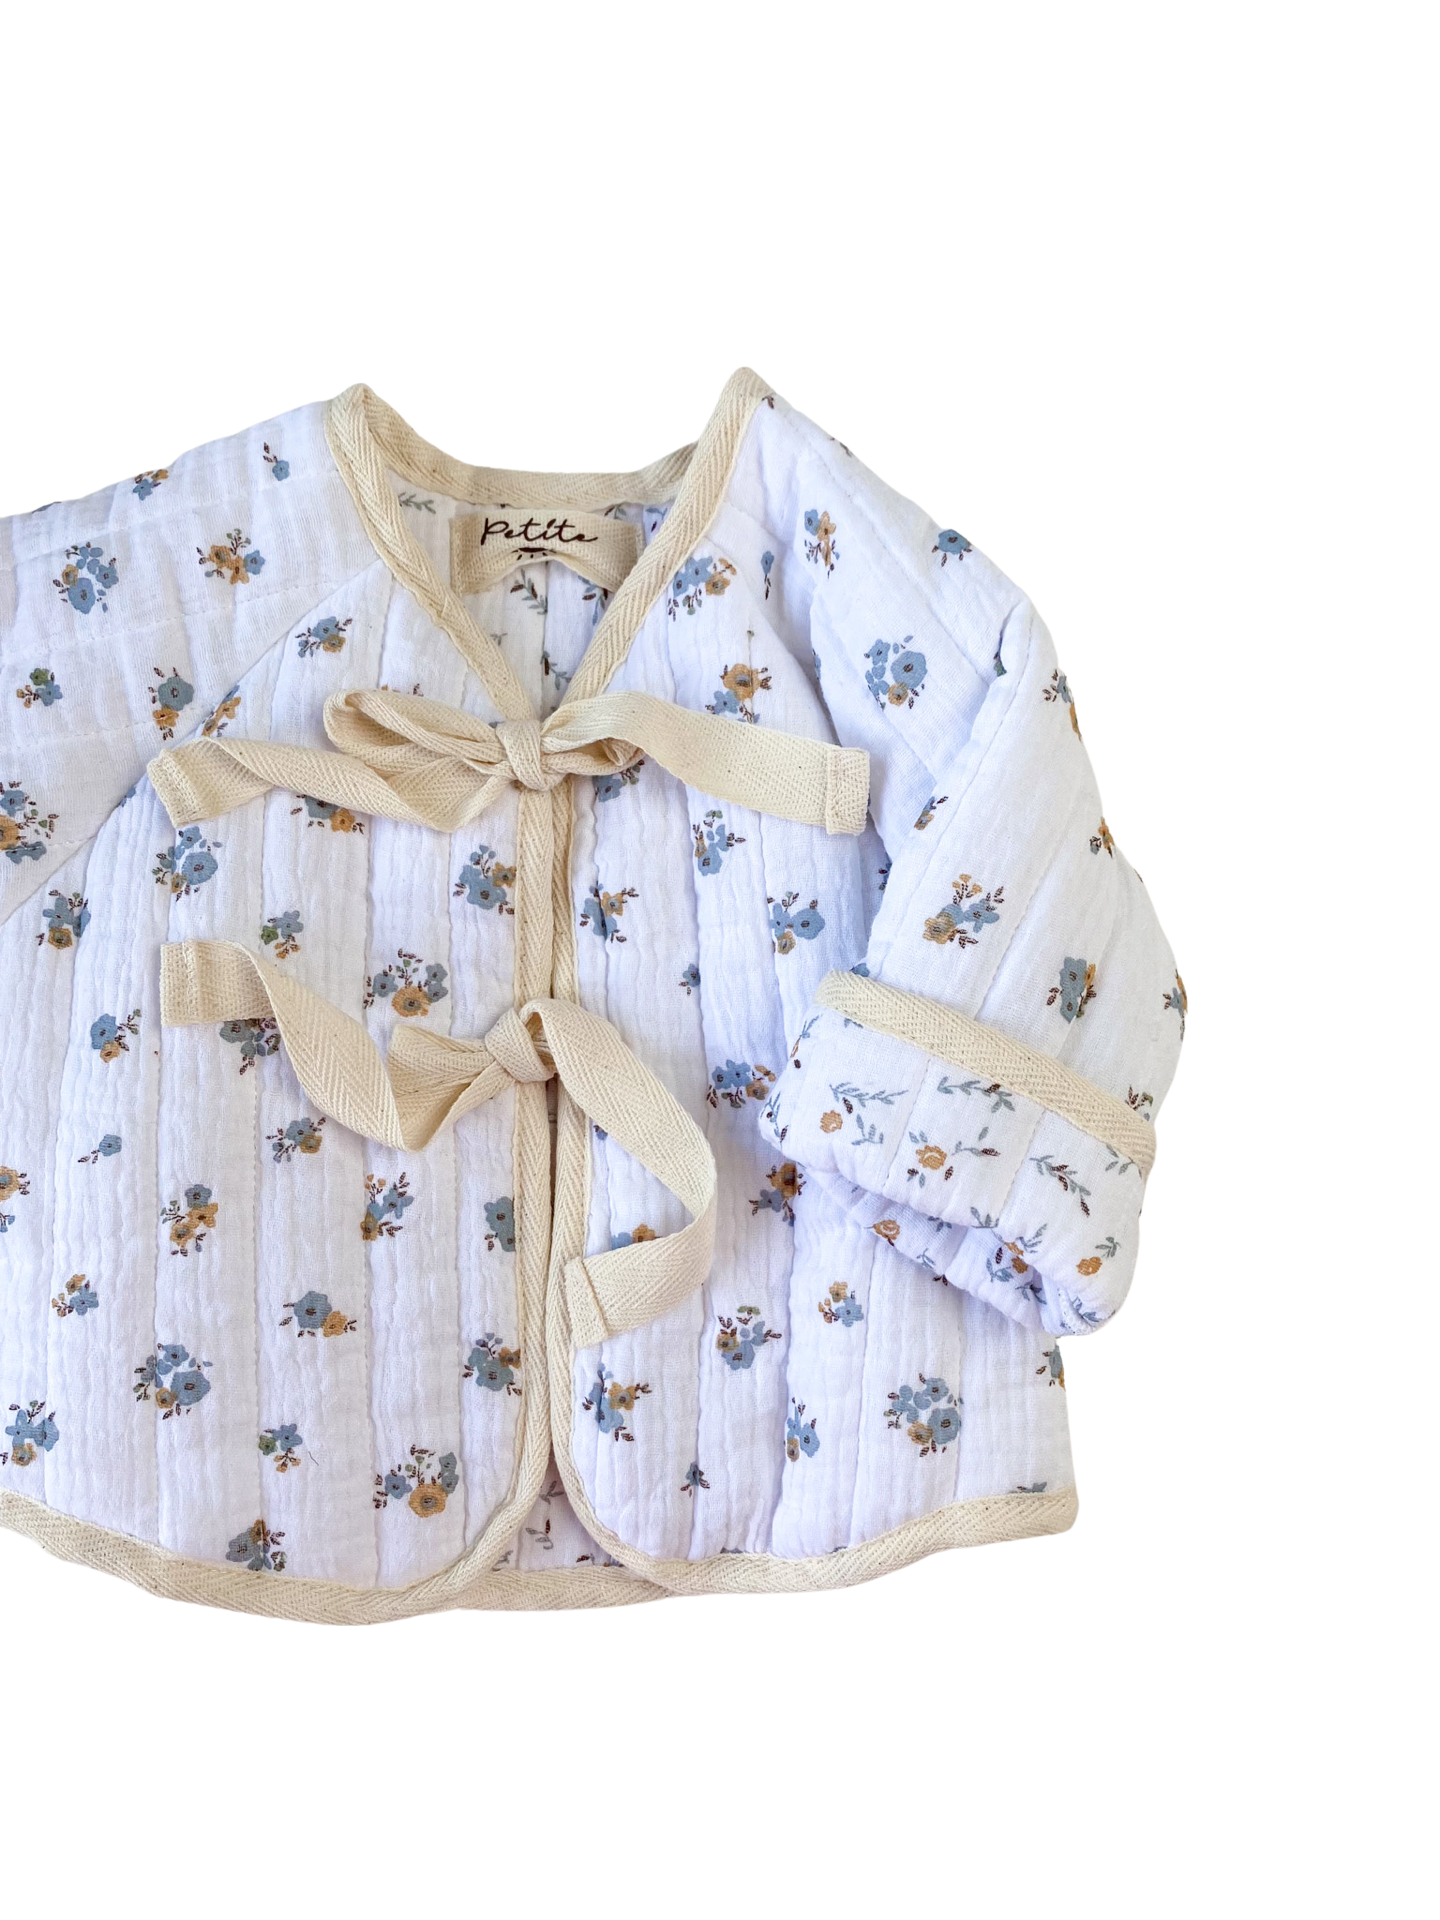 Baby & toddler quilted jacket - blue floral